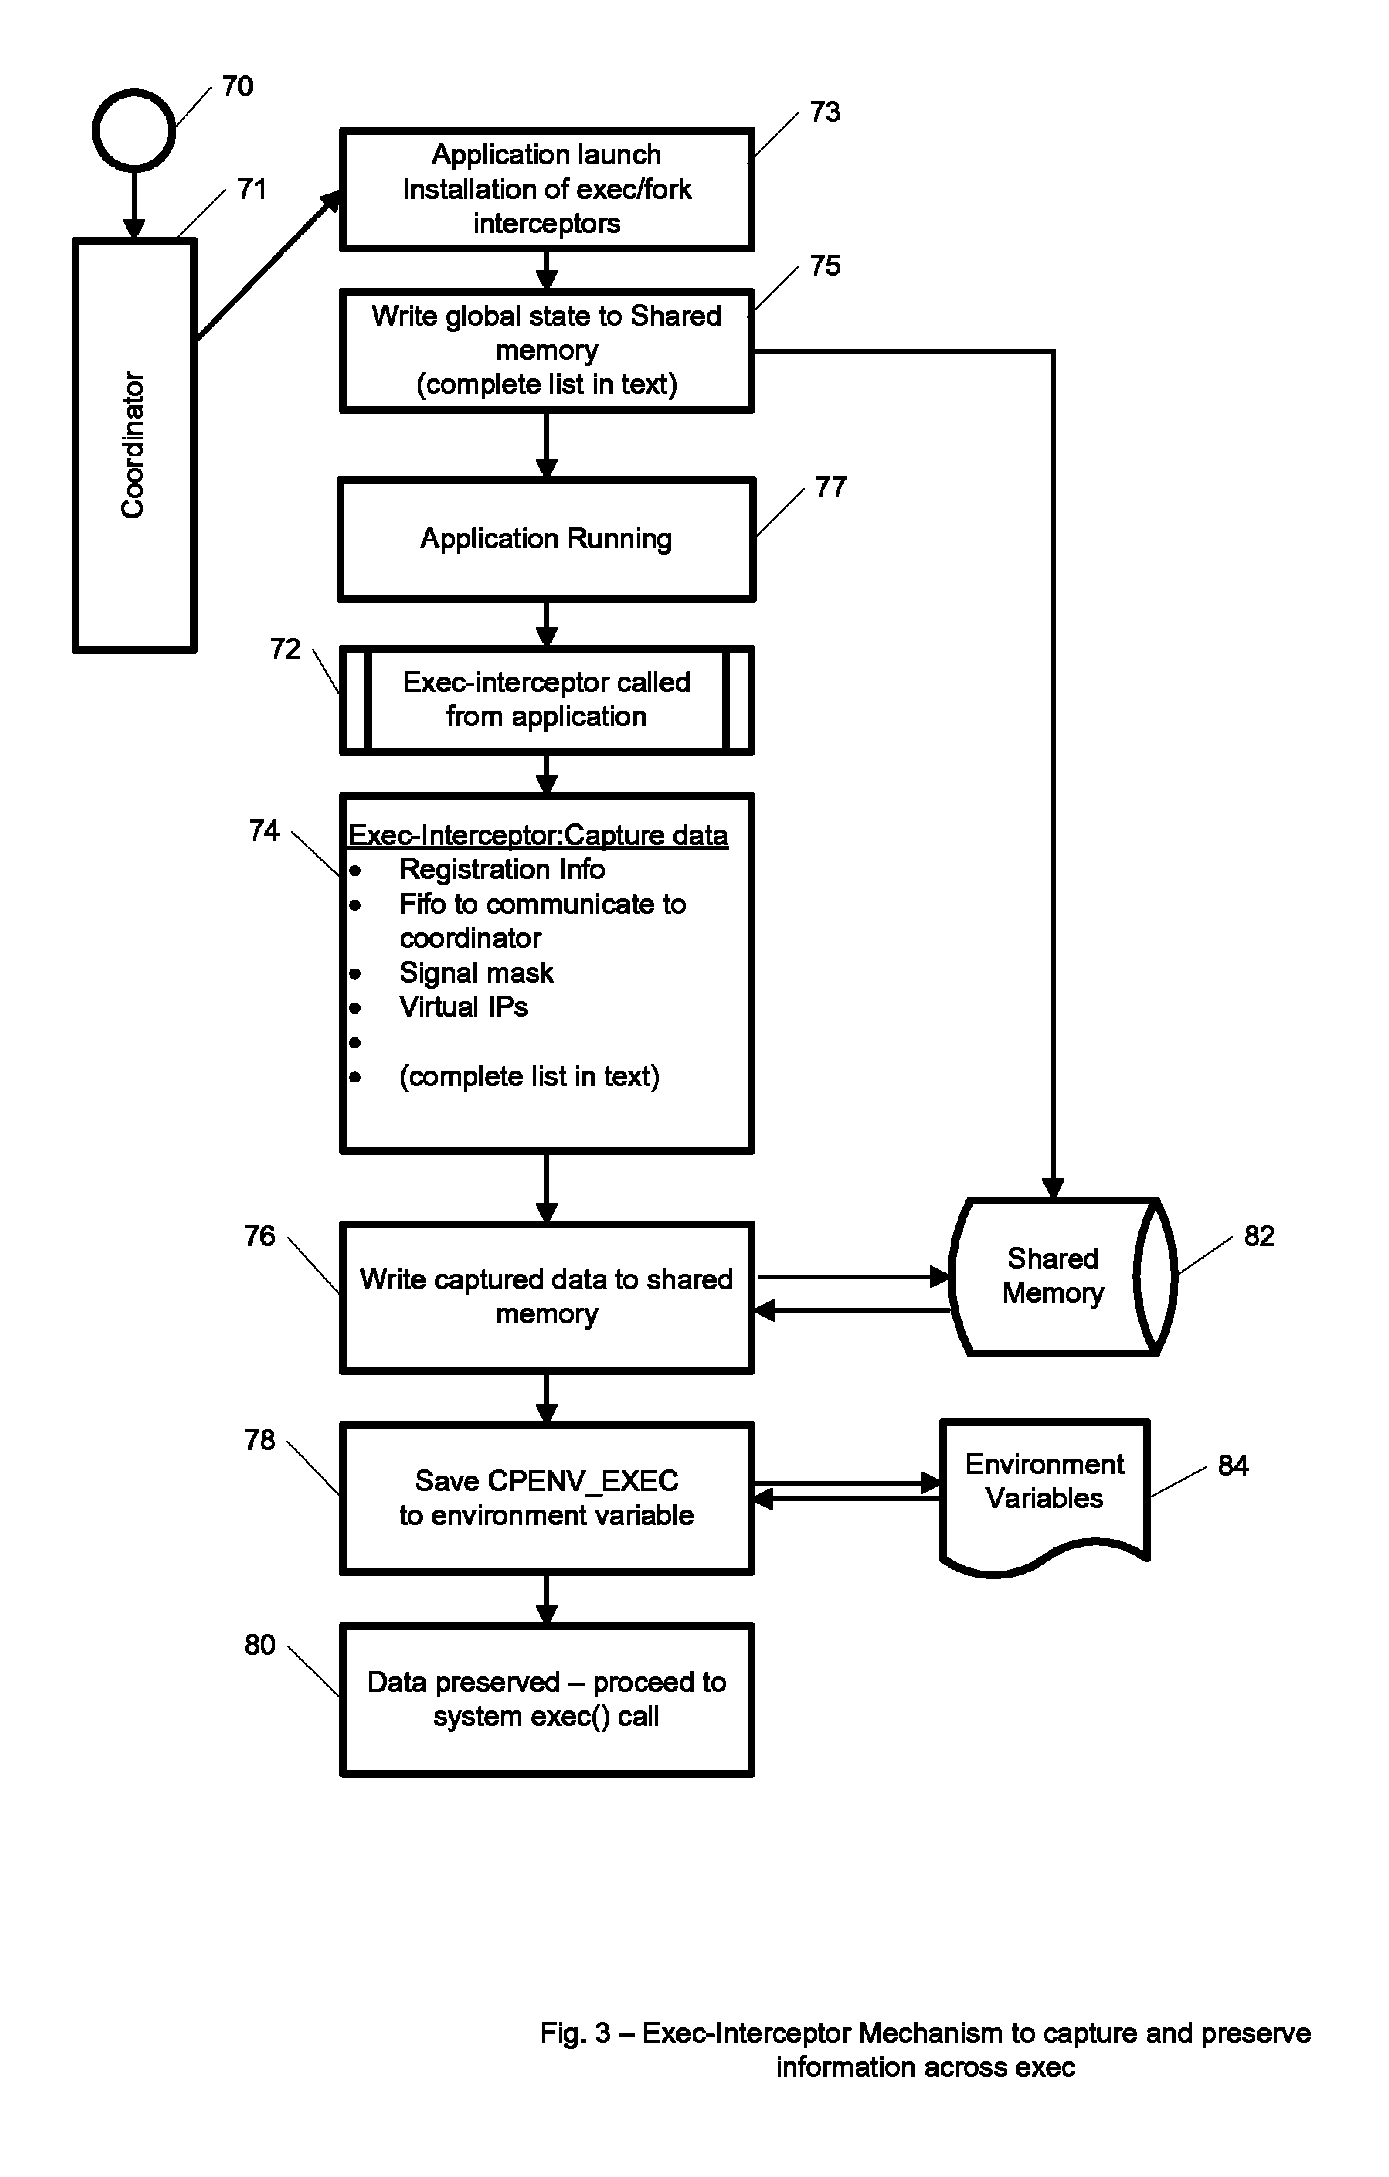 Method and system for providing coordinated checkpointing to a group of independent computer applications